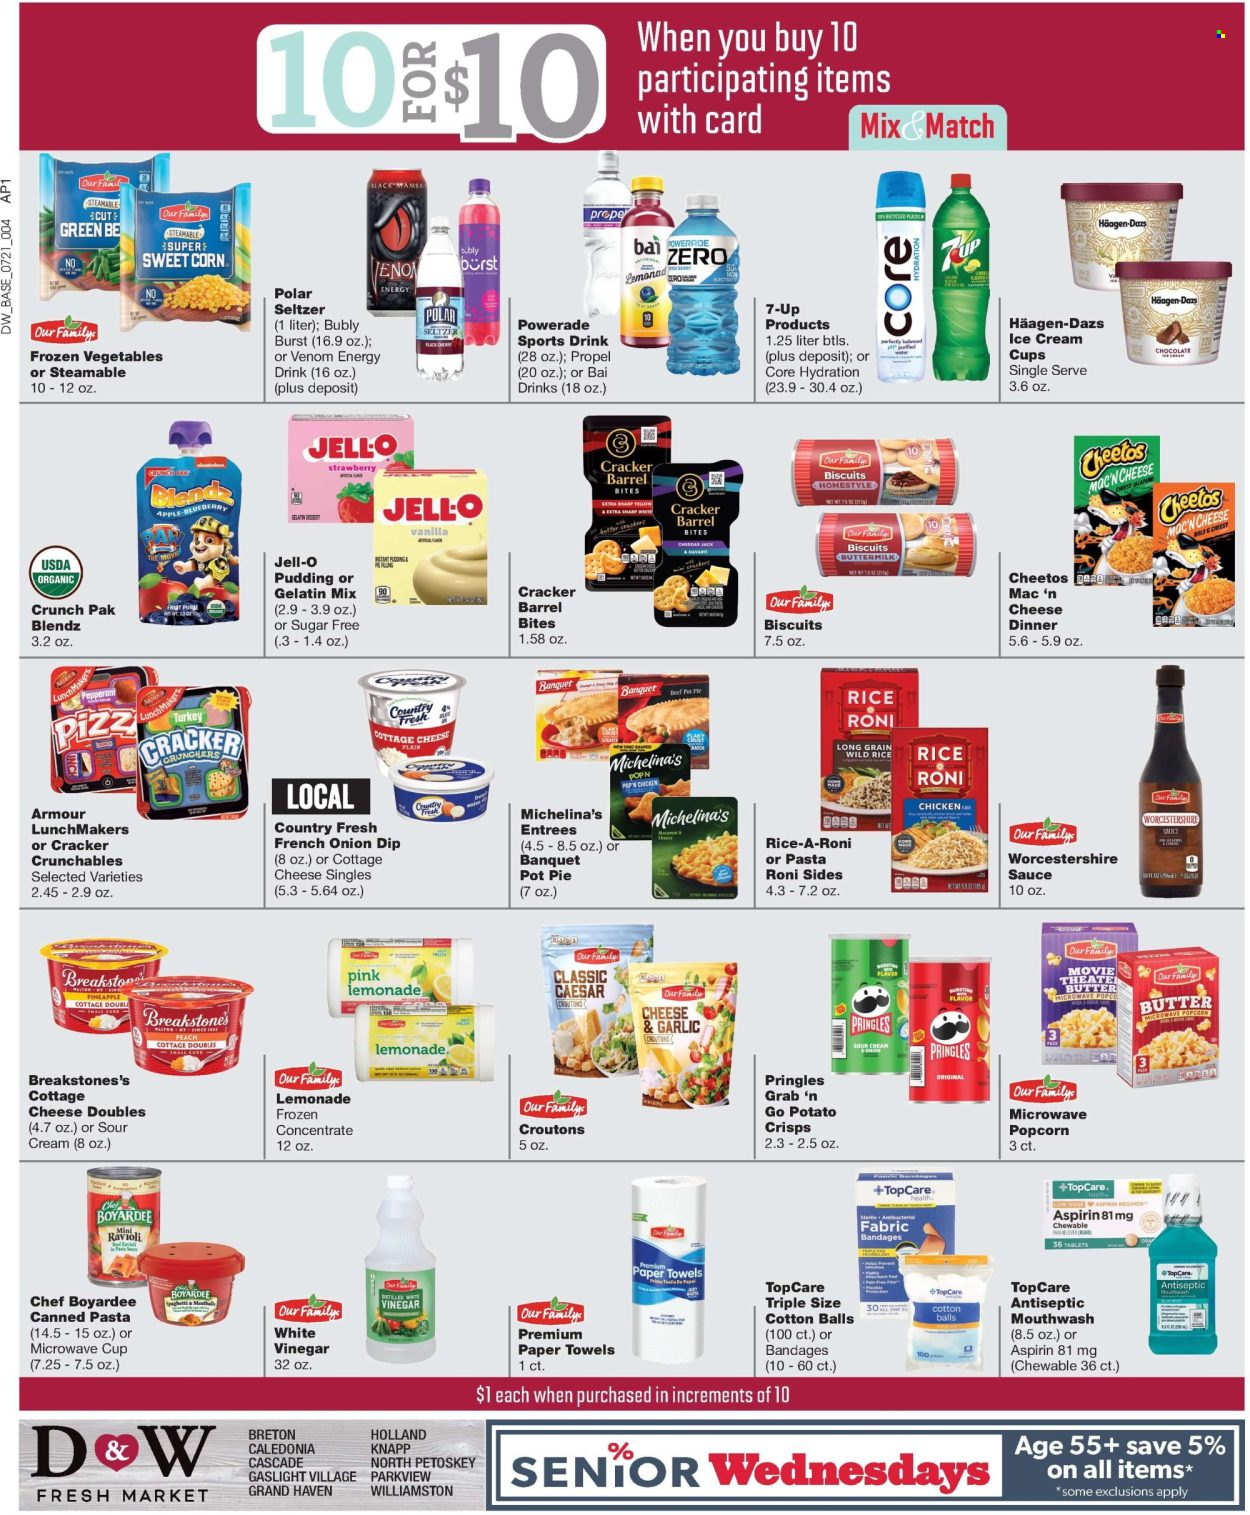 thumbnail - D&W Fresh Market Flyer - 07/21/2024 - 07/27/2024 - Sales products - pot pie, dessert, pie crust, jalapeño, sweet corn, mac and cheese, ravioli, spaghetti, pasta sauce, meatballs, snack, pasta sides, spaghetti sauce, ready meal, rice sides, pepperoni, cottage cheese, Havarti, pudding, dip, Häagen-Dazs, frozen vegetables, biscuit, potato crisps, Pringles, Cheetos, popcorn, crisps, croutons, pie filling, Jell-O, Chef Boyardee, long grain rice, worcestershire sauce, sauce, vinegar, lemonade, Powerade, energy drink, soft drink, 7UP, Bai, electrolyte drink, antioxidant drink, seltzer water, flavored water, purified water, water, lemon juice, carbonated soft drink, chicken, cotton balls, kitchen towels, paper towels, Cascade, mouthwash, Low Dose, aspirin, Bayer, pain therapy. Page 2.